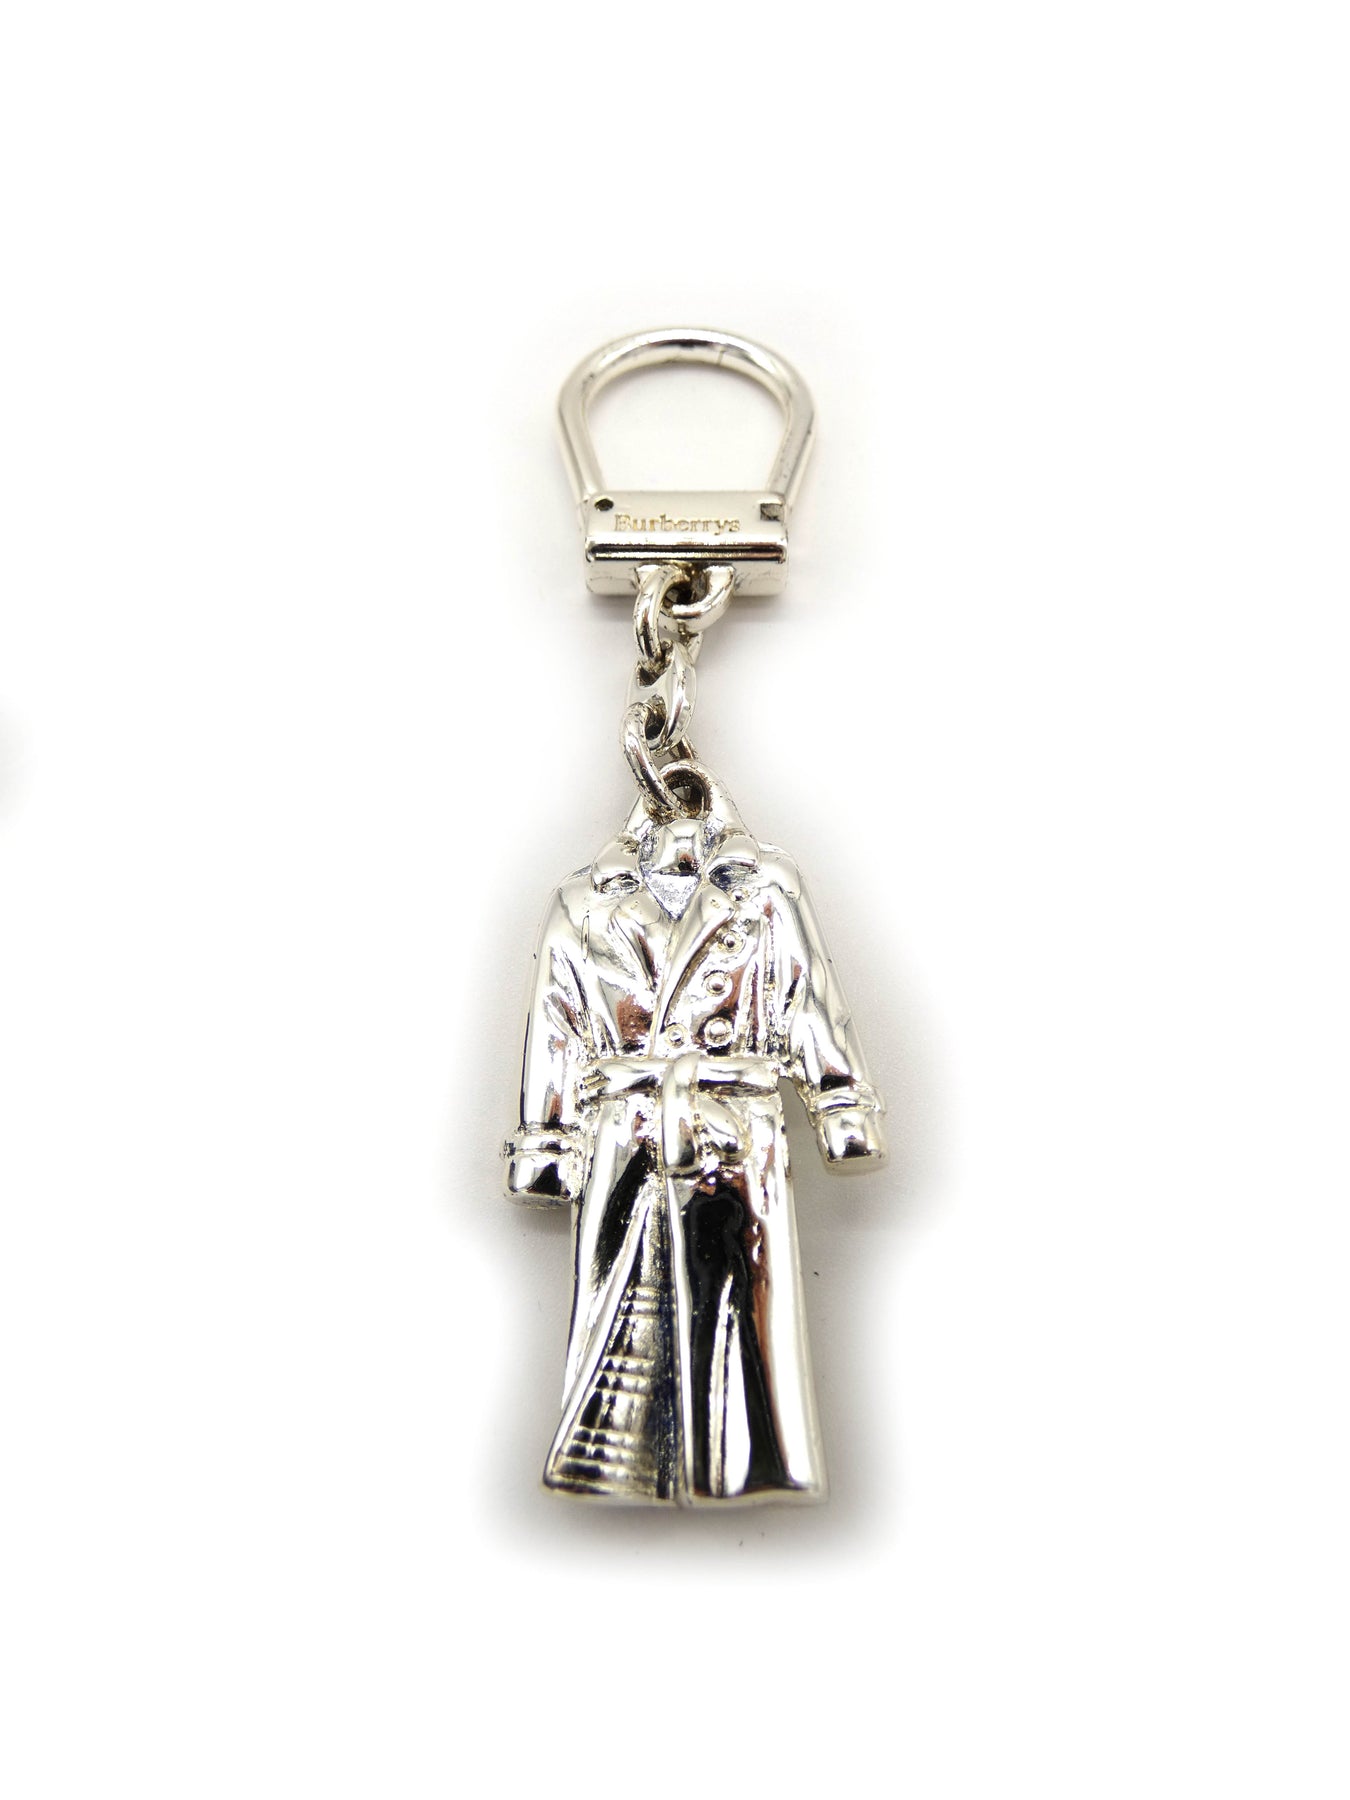 Burberry Silver Vintage Keychains